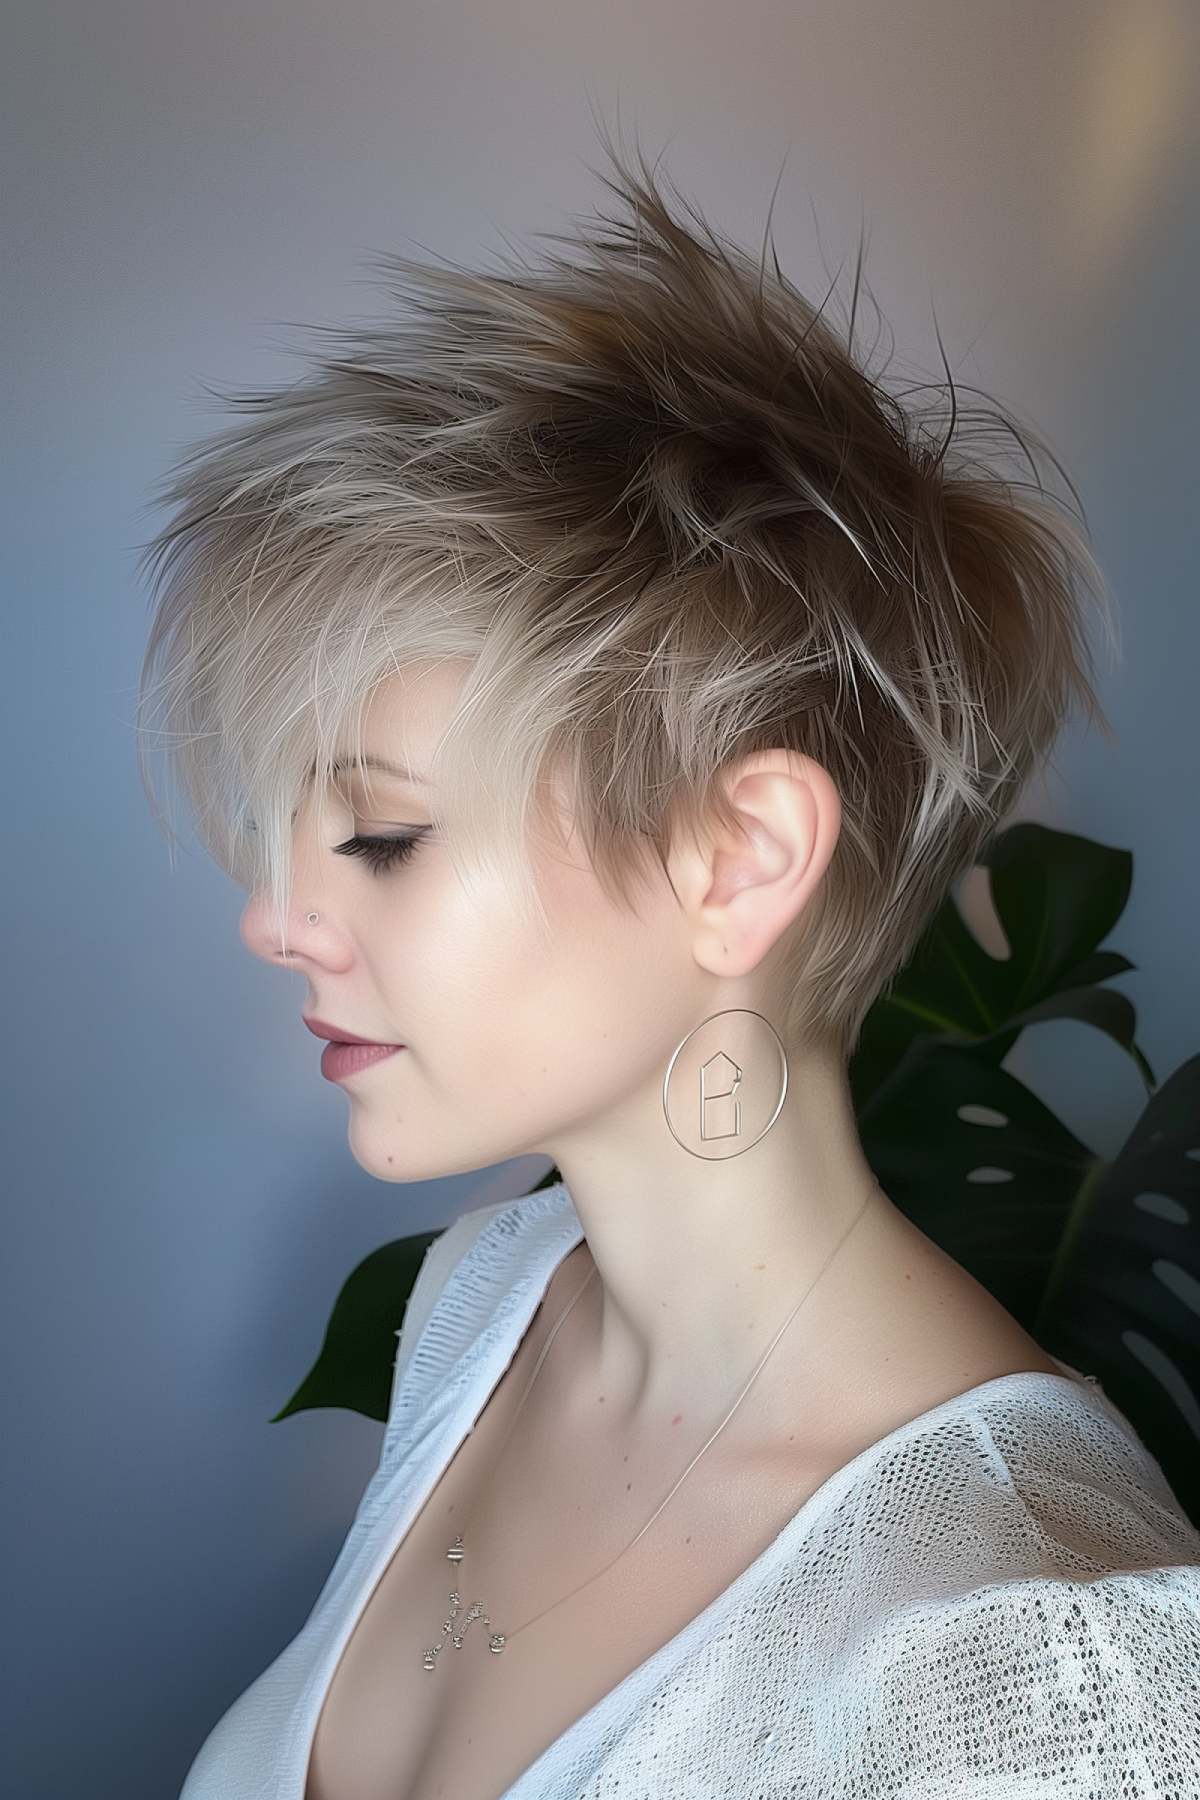 Young woman with a short, textured pixie haircut featuring a blonde tousled top and dark undercut